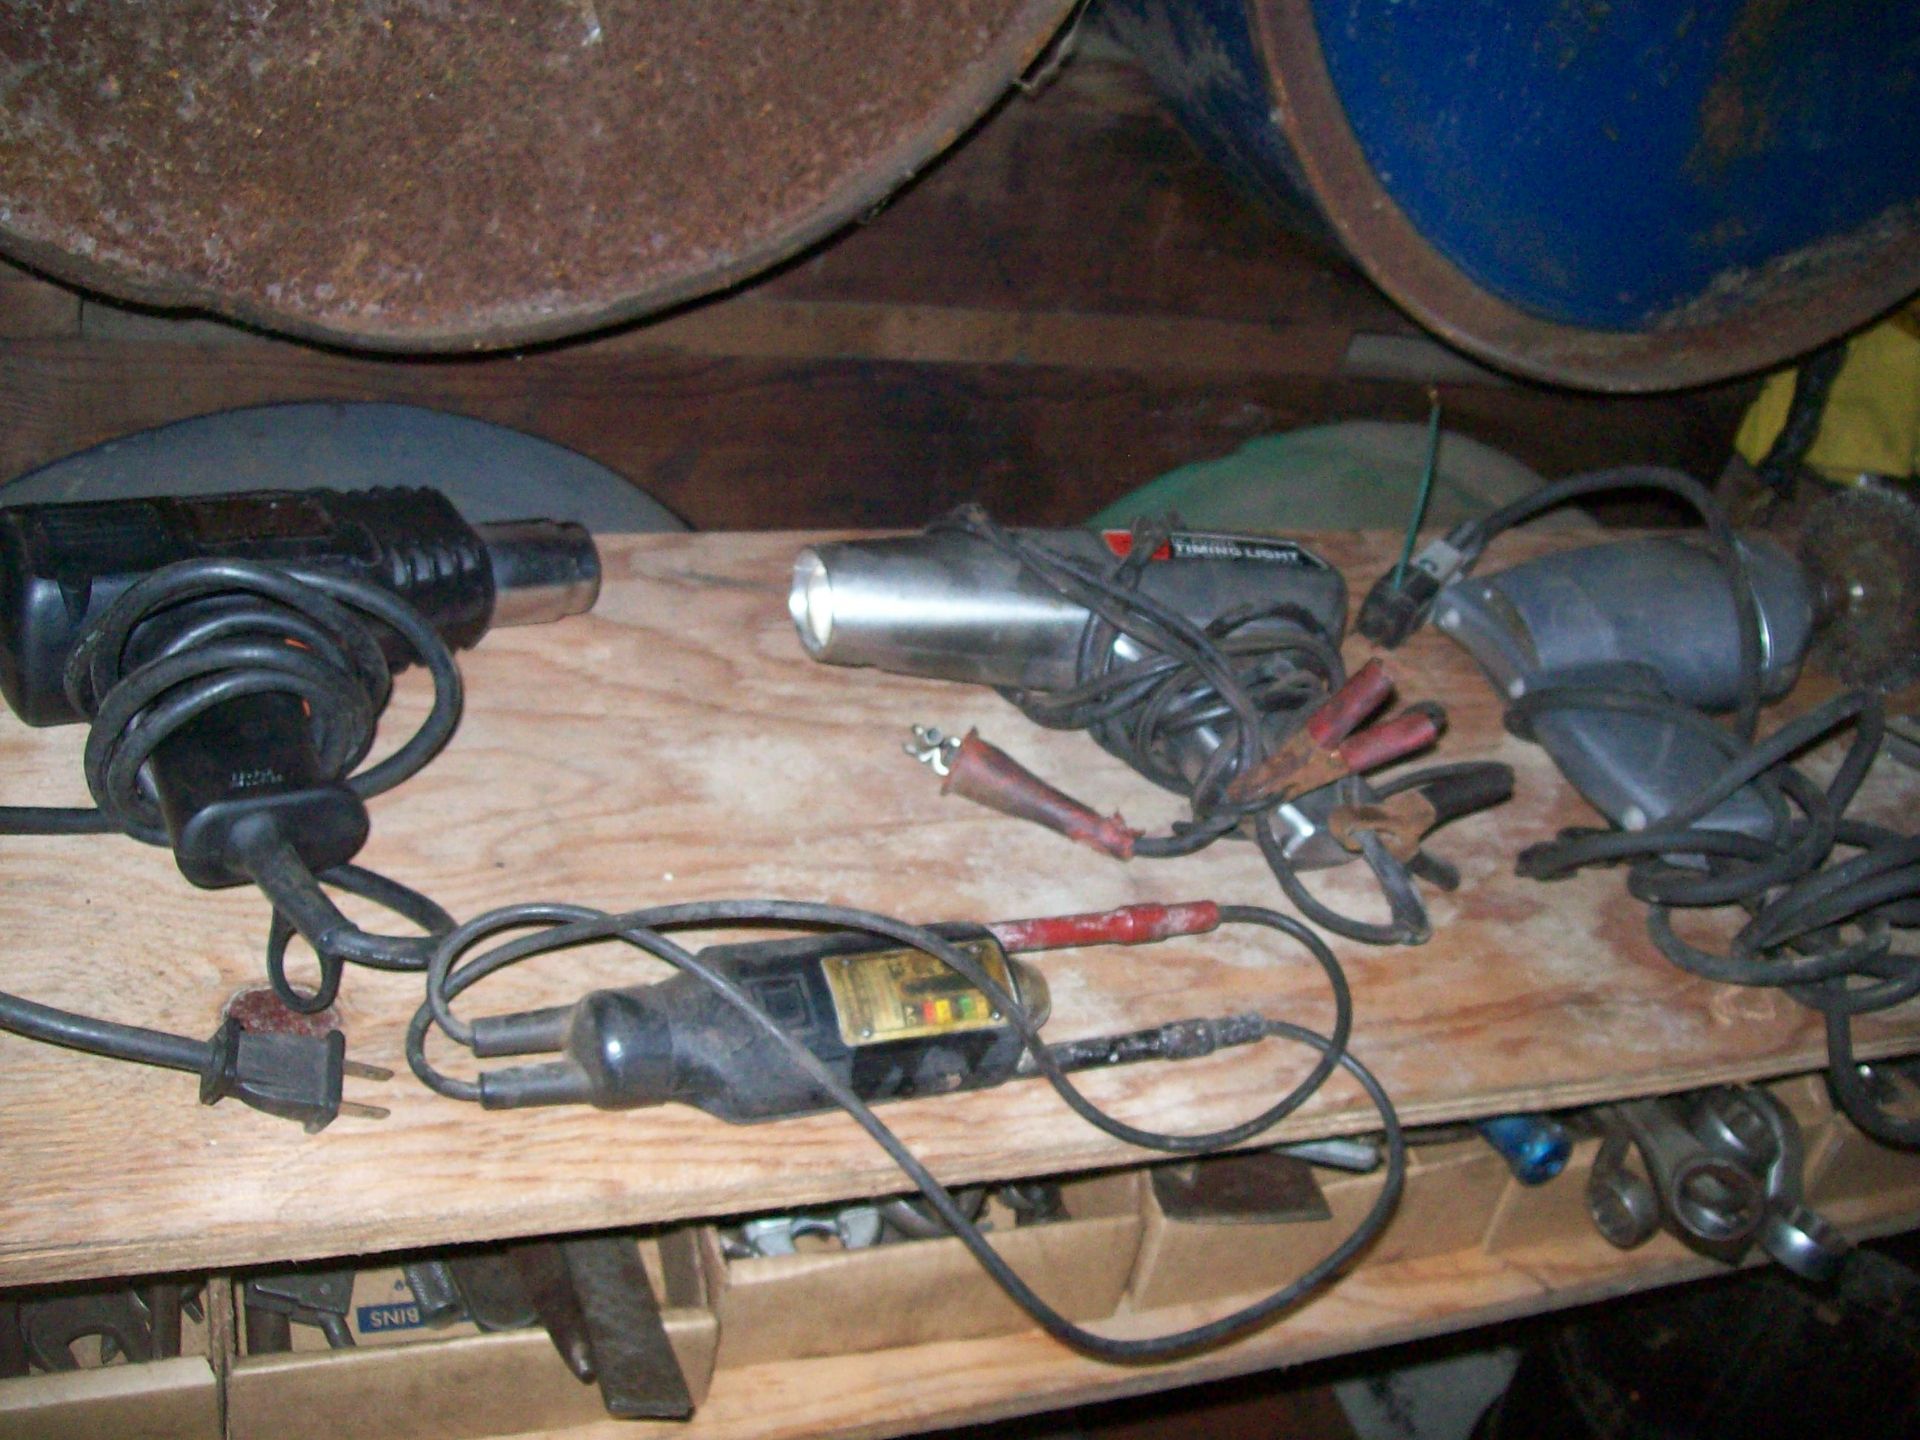 Lot ass't electric tools includes (1) Holmes heat blaster space heater, rechargeable spotlight, ( - Image 2 of 4